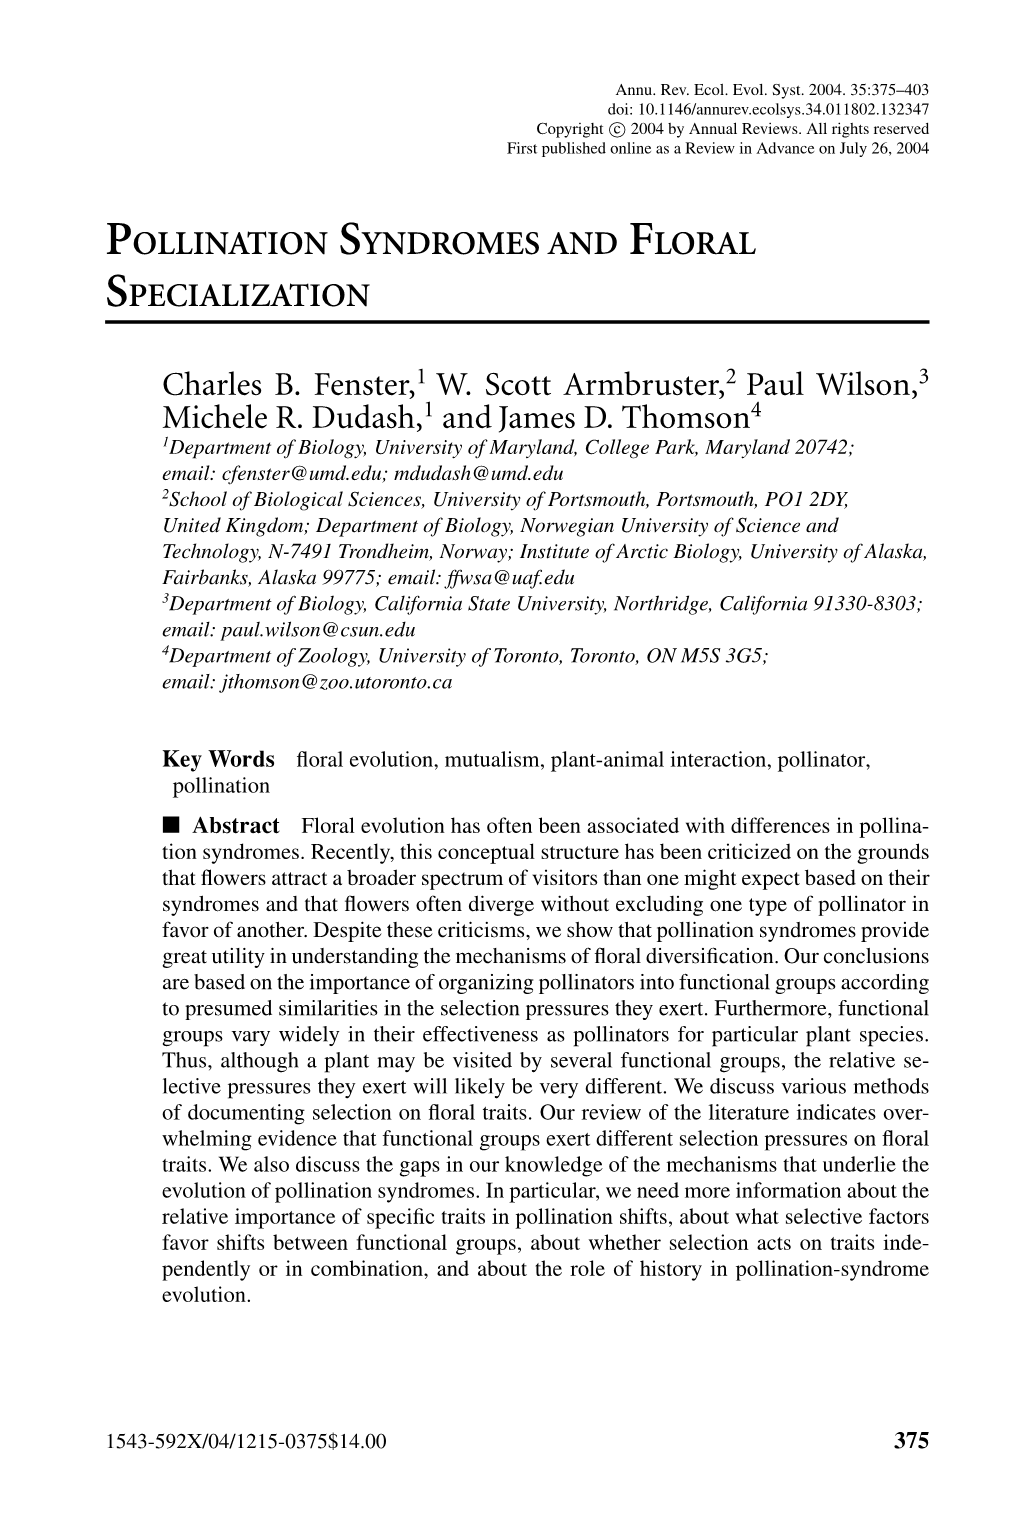 POLLINATION SYNDROMES and FLORAL SPECIALIZATION Charles